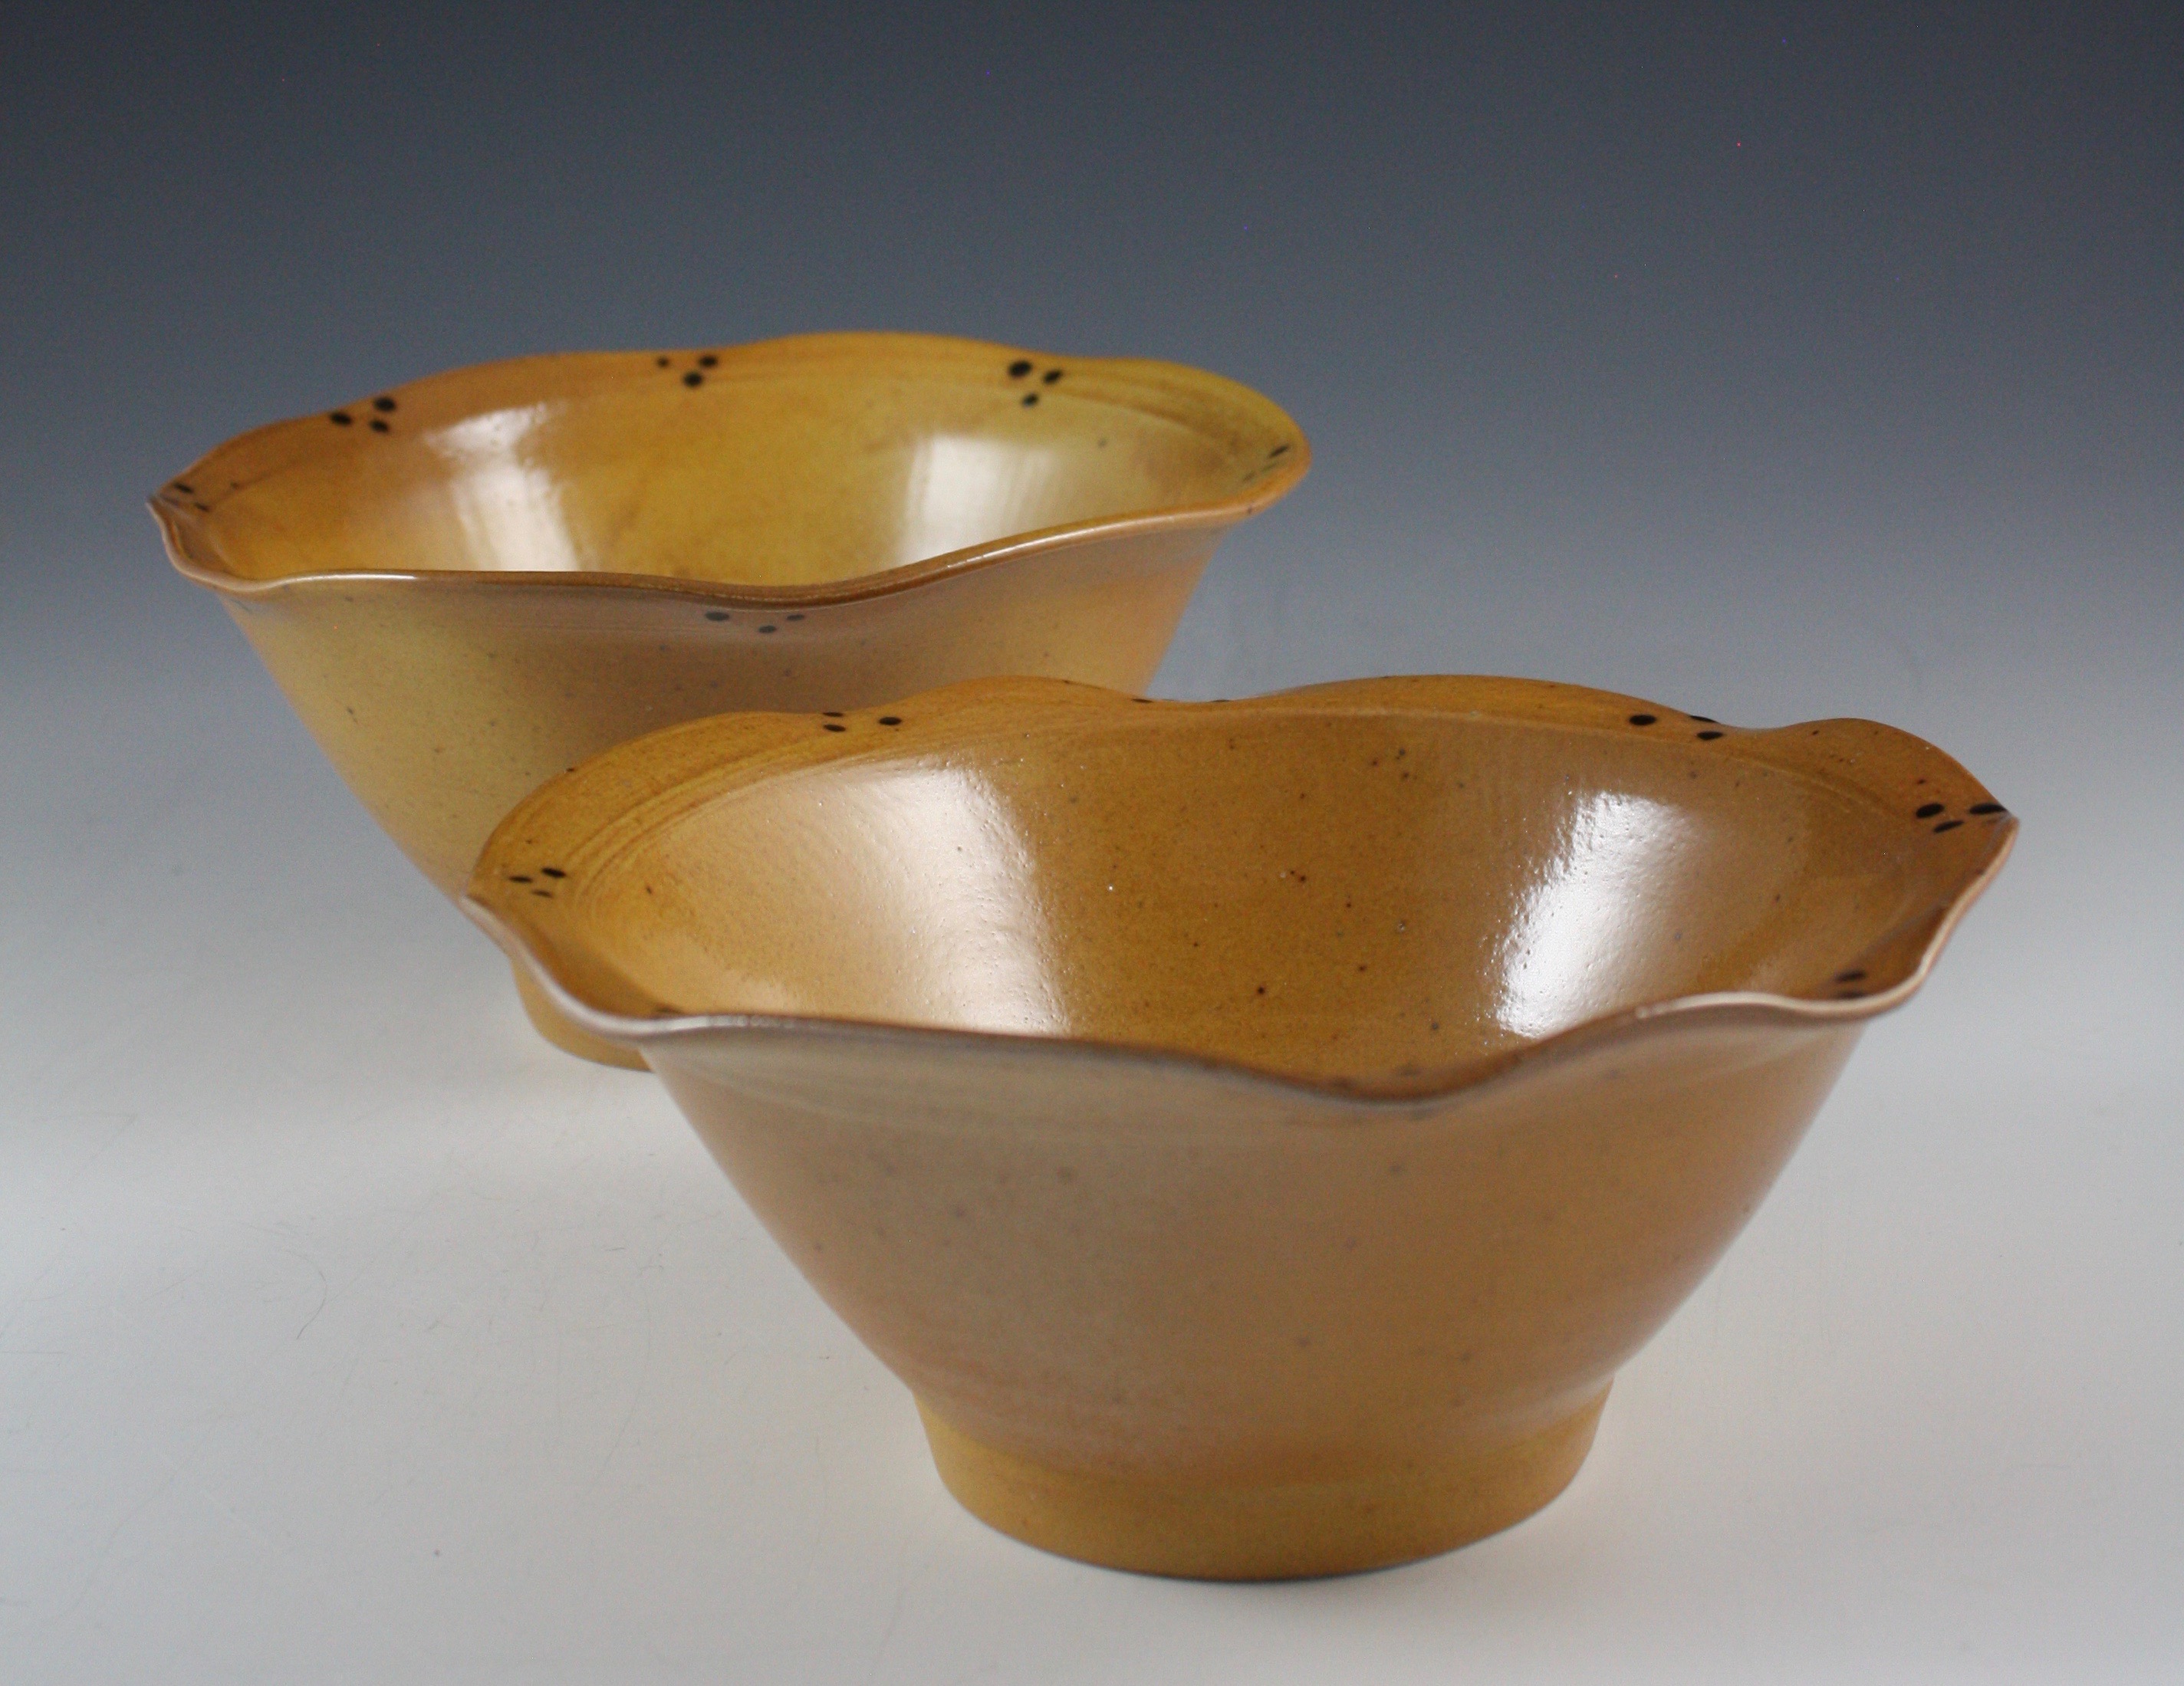 Bowls with fluted edges